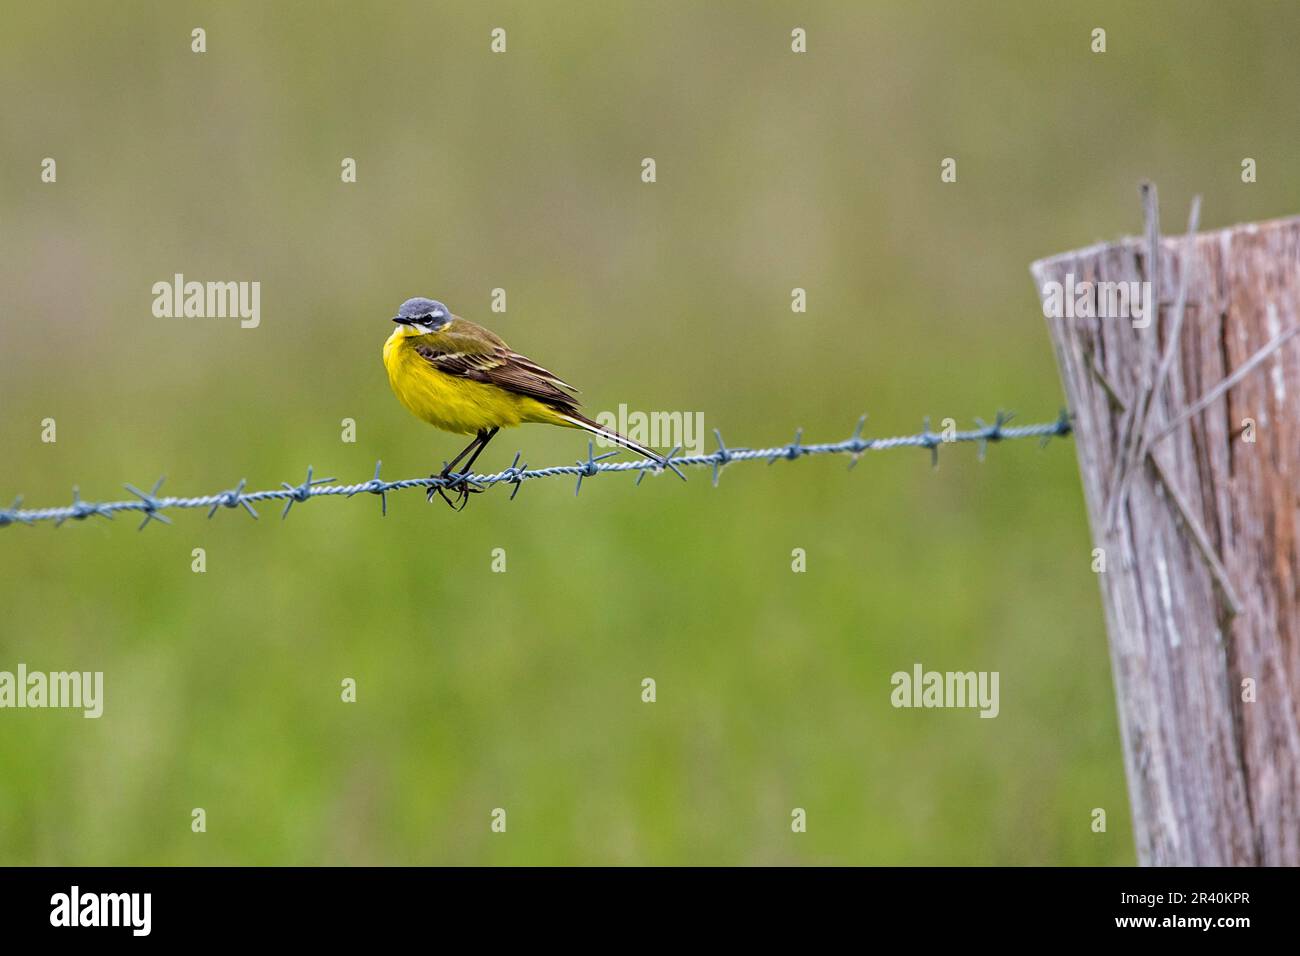 Western yellow wagtail / blue-headed wagtail (Motacilla flava flava) adult male in breeding plumage perched on barbed wire / barbwire along field Stock Photo